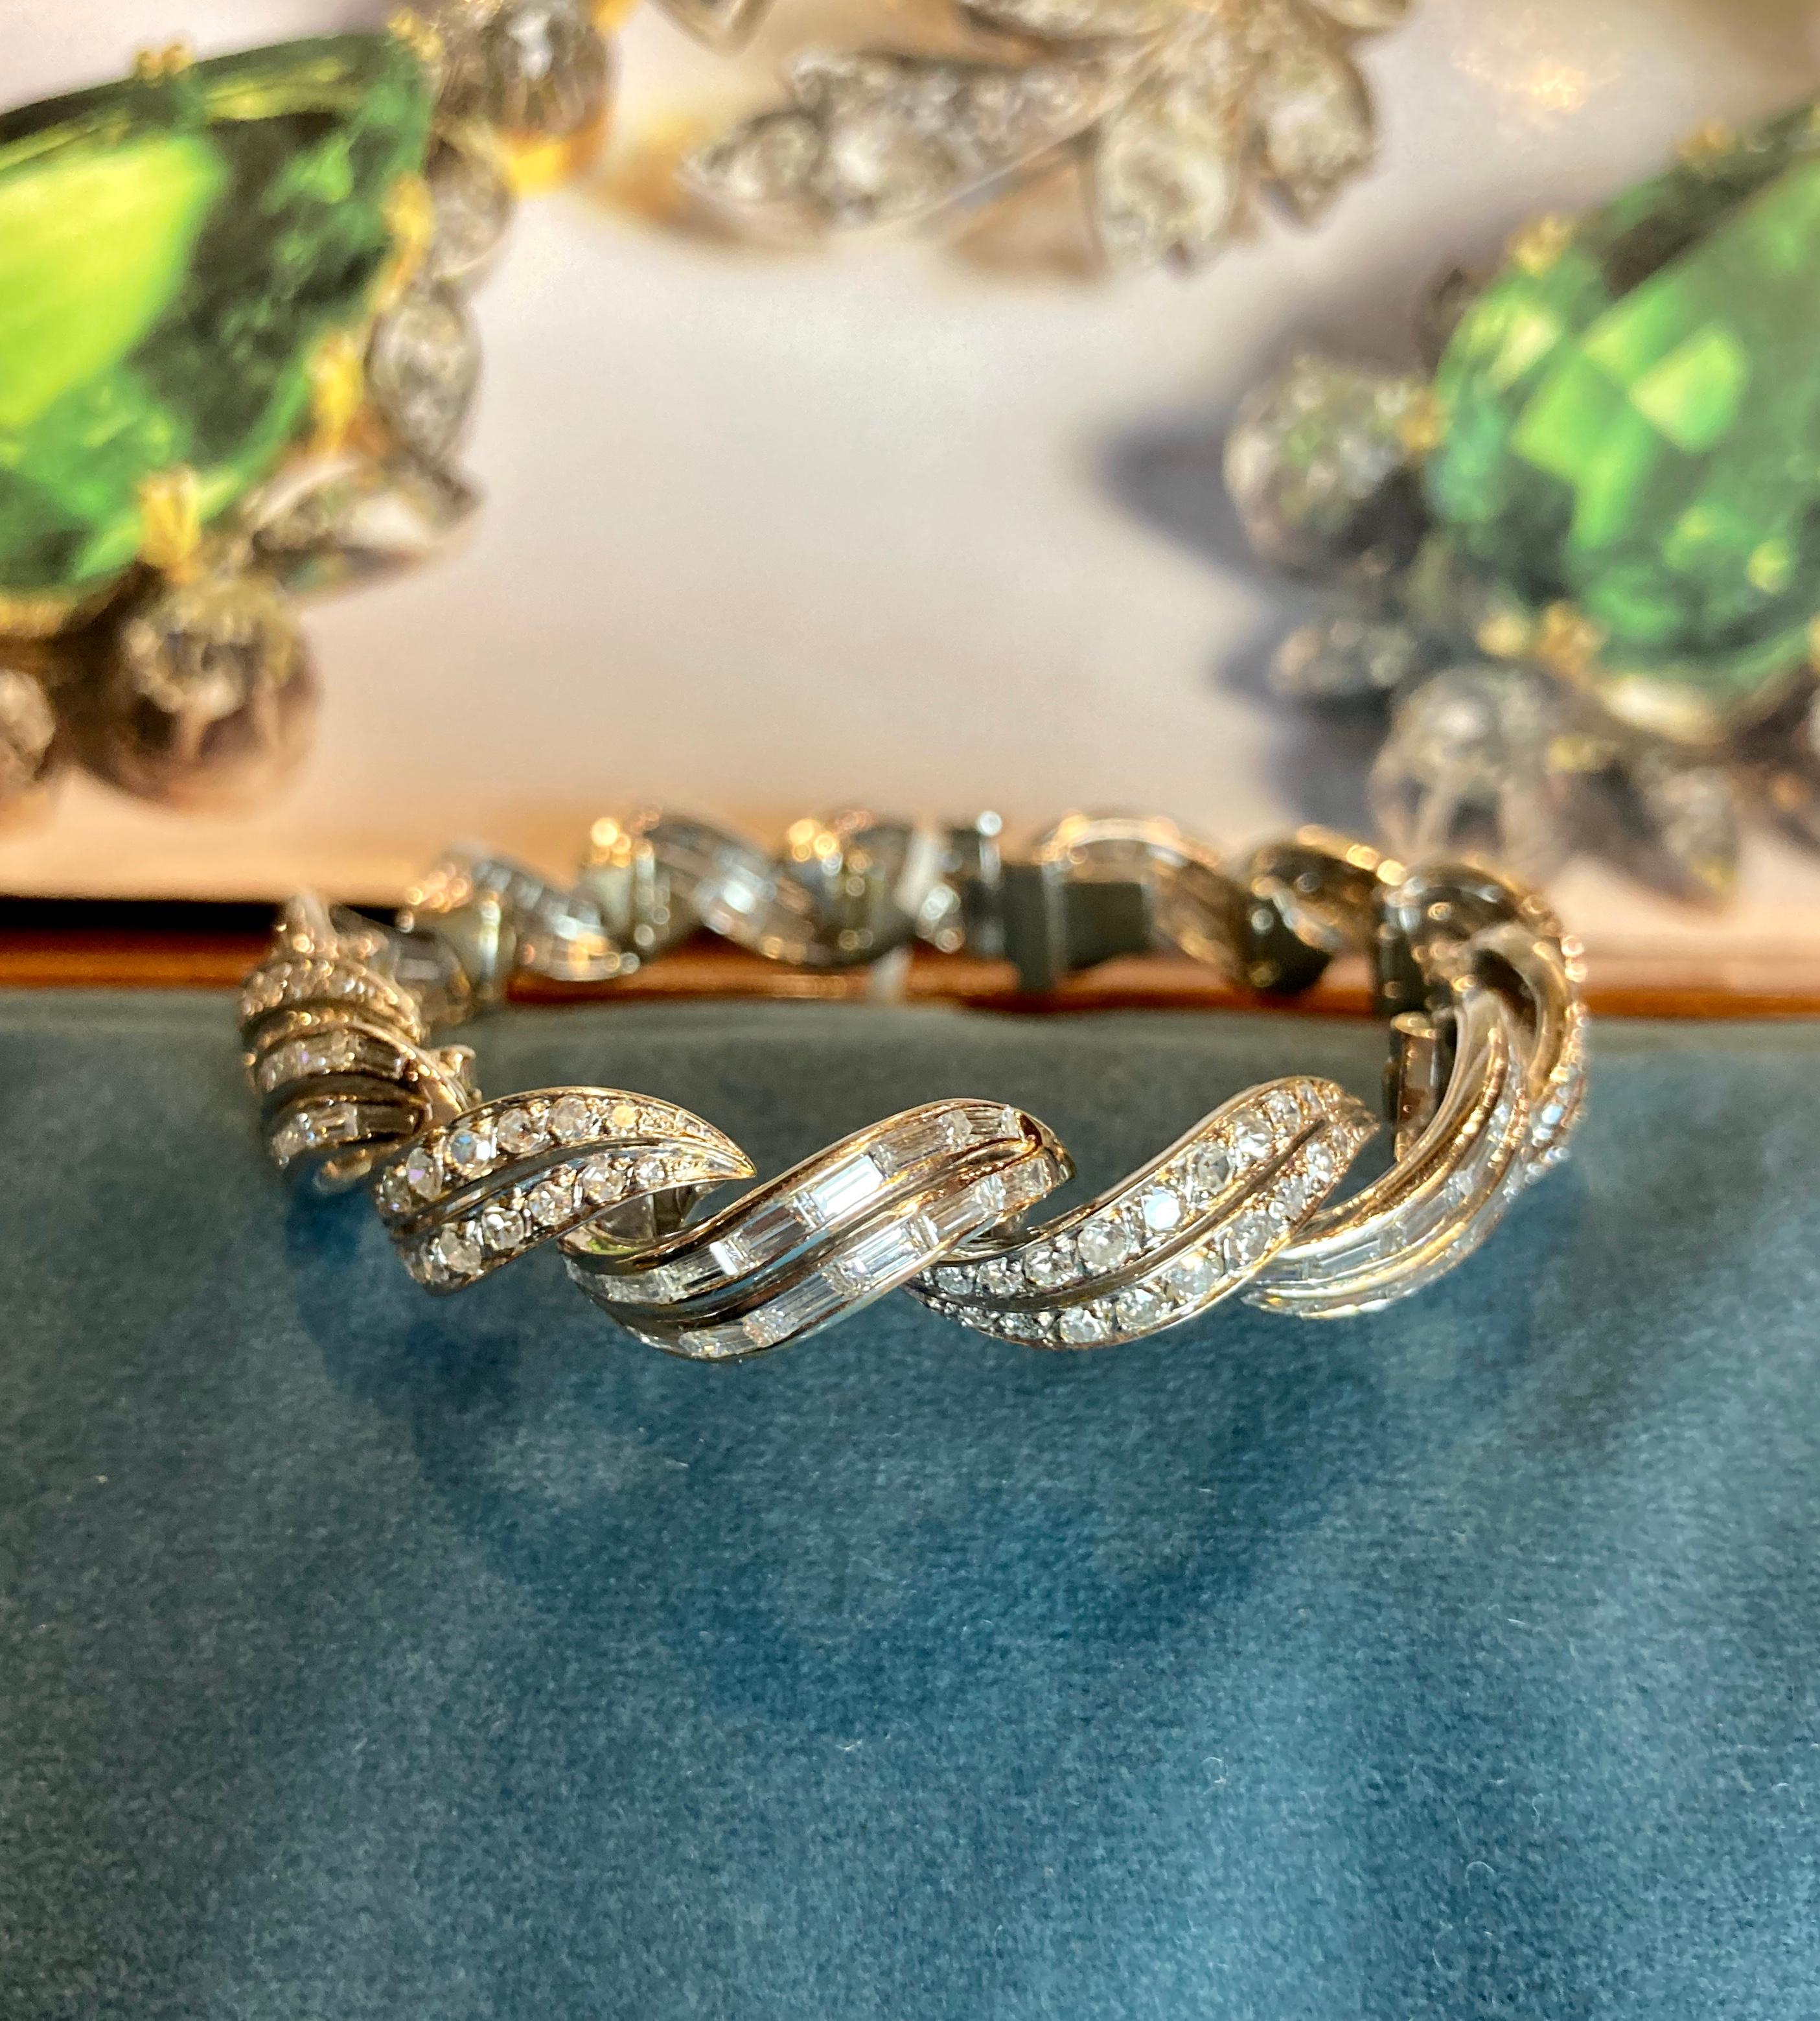 A beautiful Art Deco bracelet featuring 10 carats of round brilliant and baguette cut diamonds mounted in 18 karat white gold. Measures 6.5 inches long. Made in France, circa 1920s.